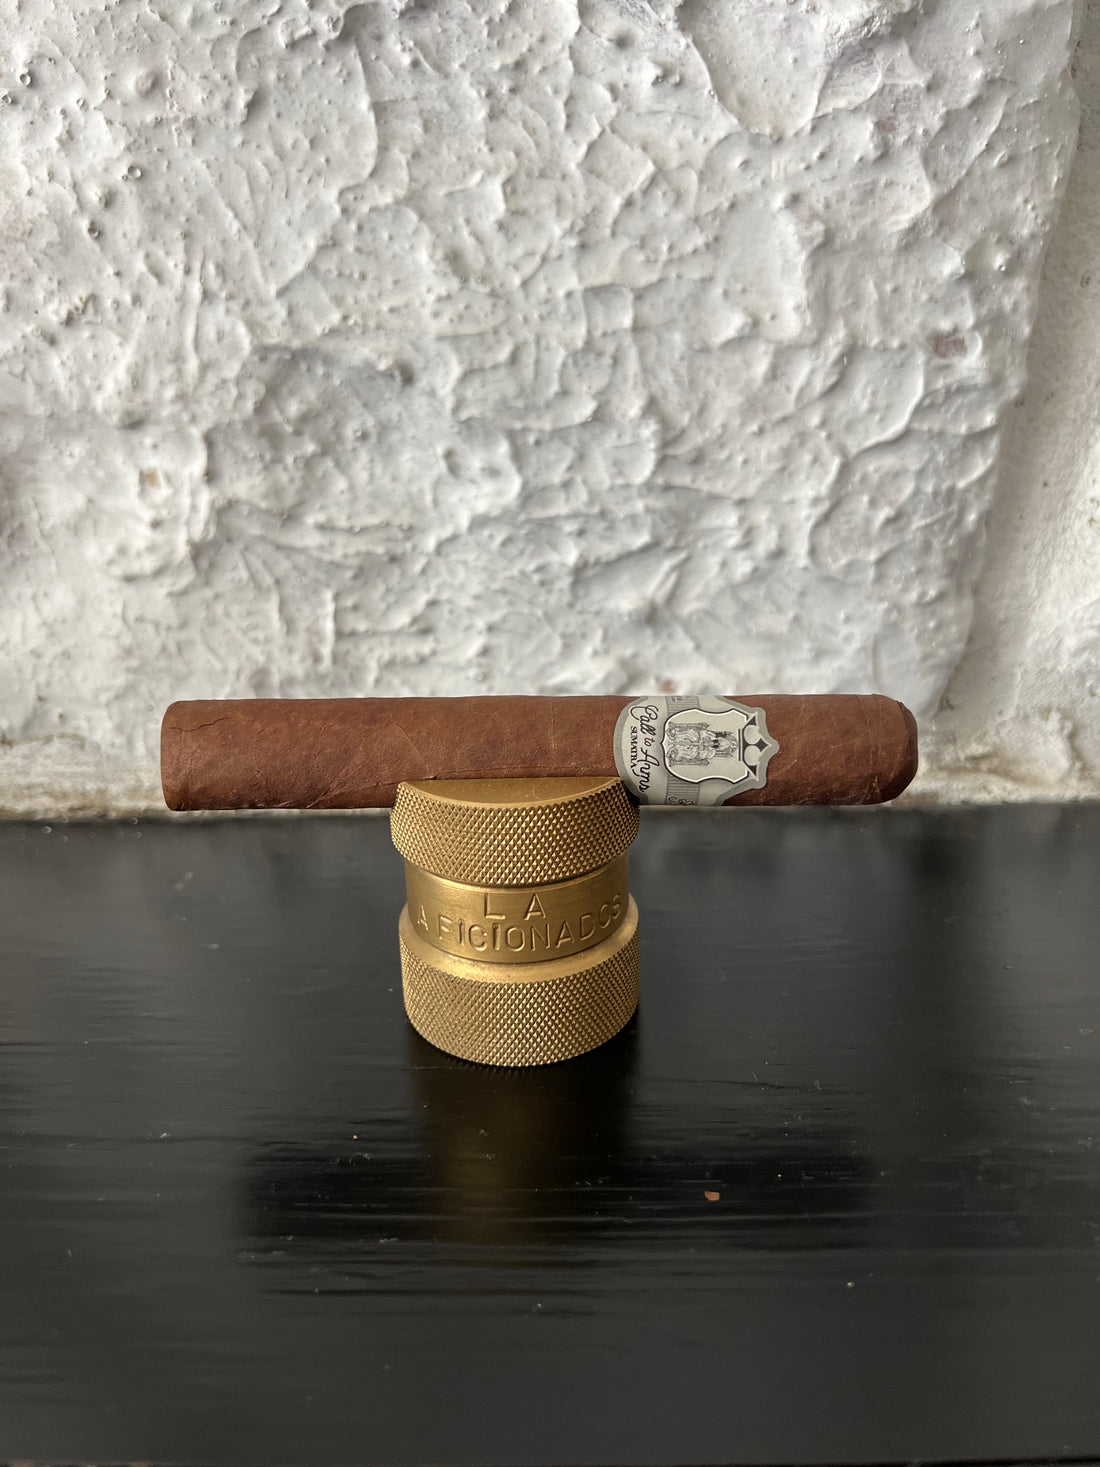 The Stolen Throne Call to Arms Robusto